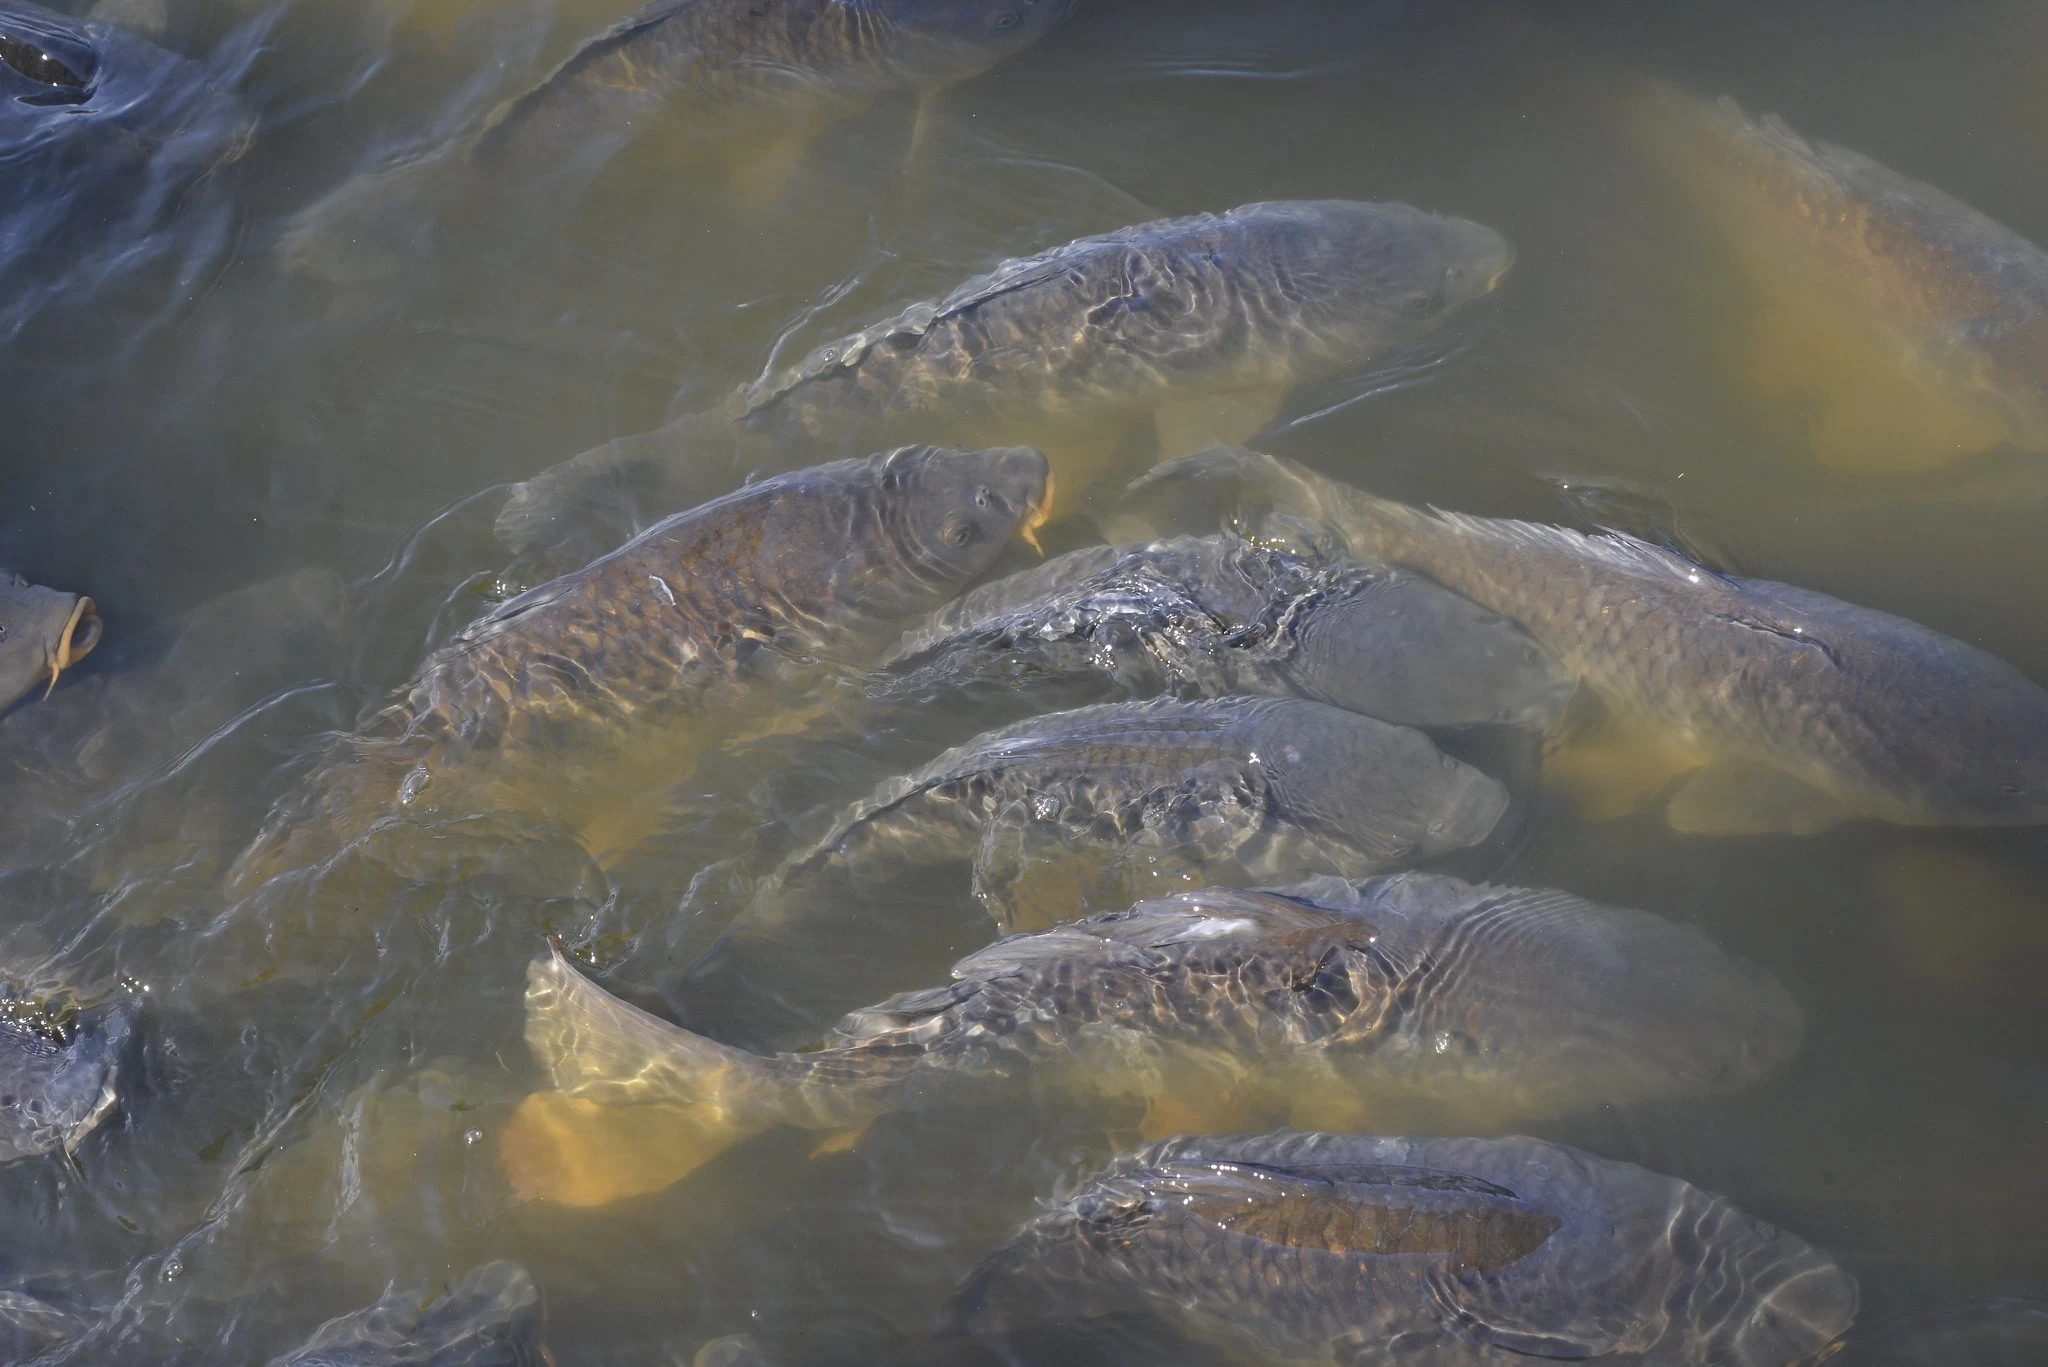 DDGS boosts carp yield in Hungarian study